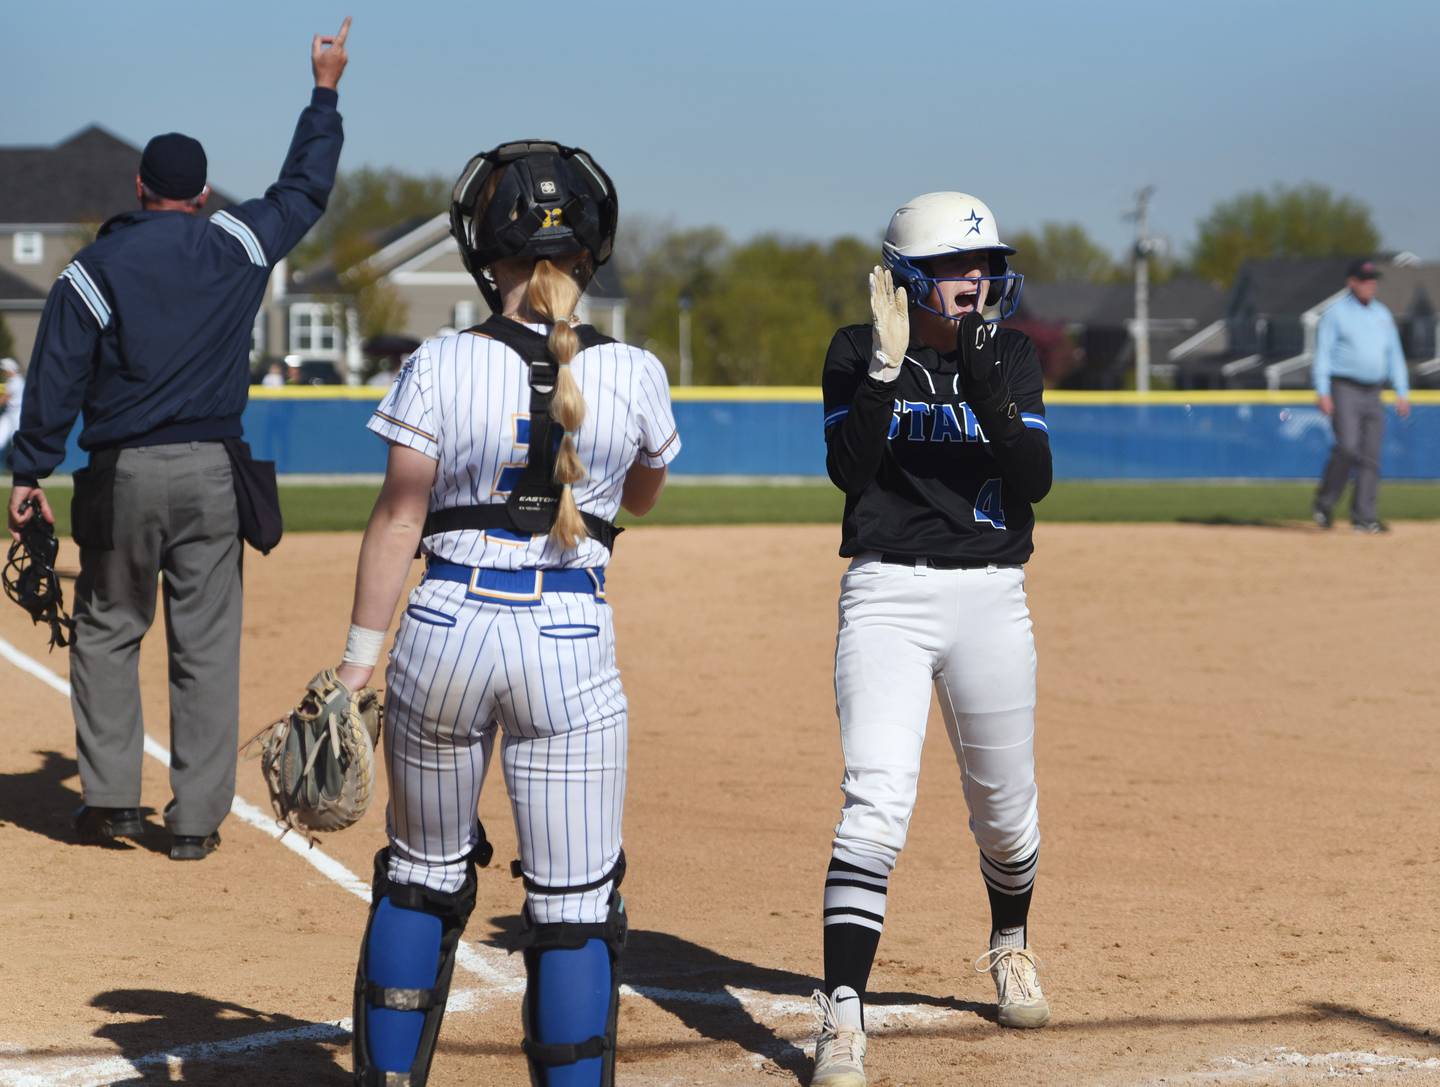 St. Charles North's Julia Larson (4) celebrates scoring after teammate Maddie Hernandez hit a home run during Wednesday’s softball game in Wheaton.